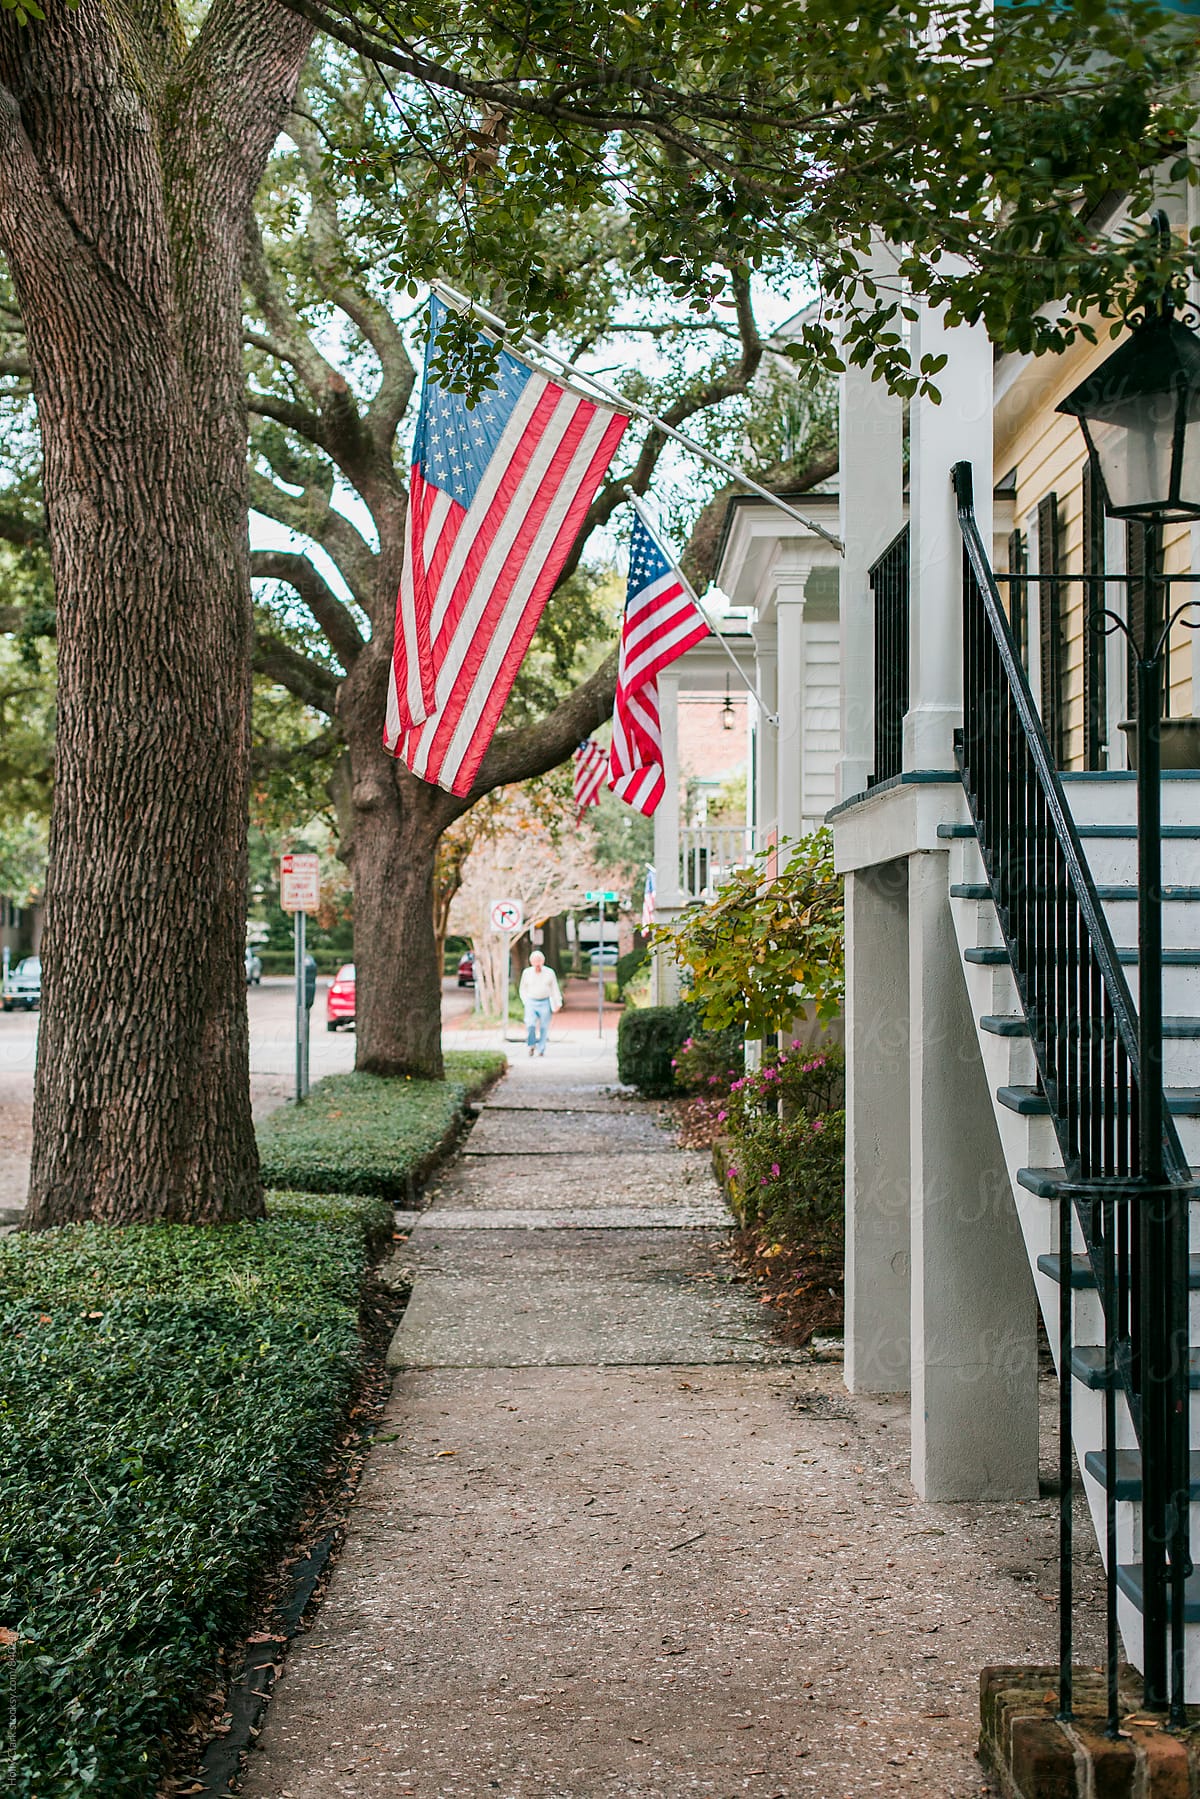 American flags flying on a residential street in the Southern United States